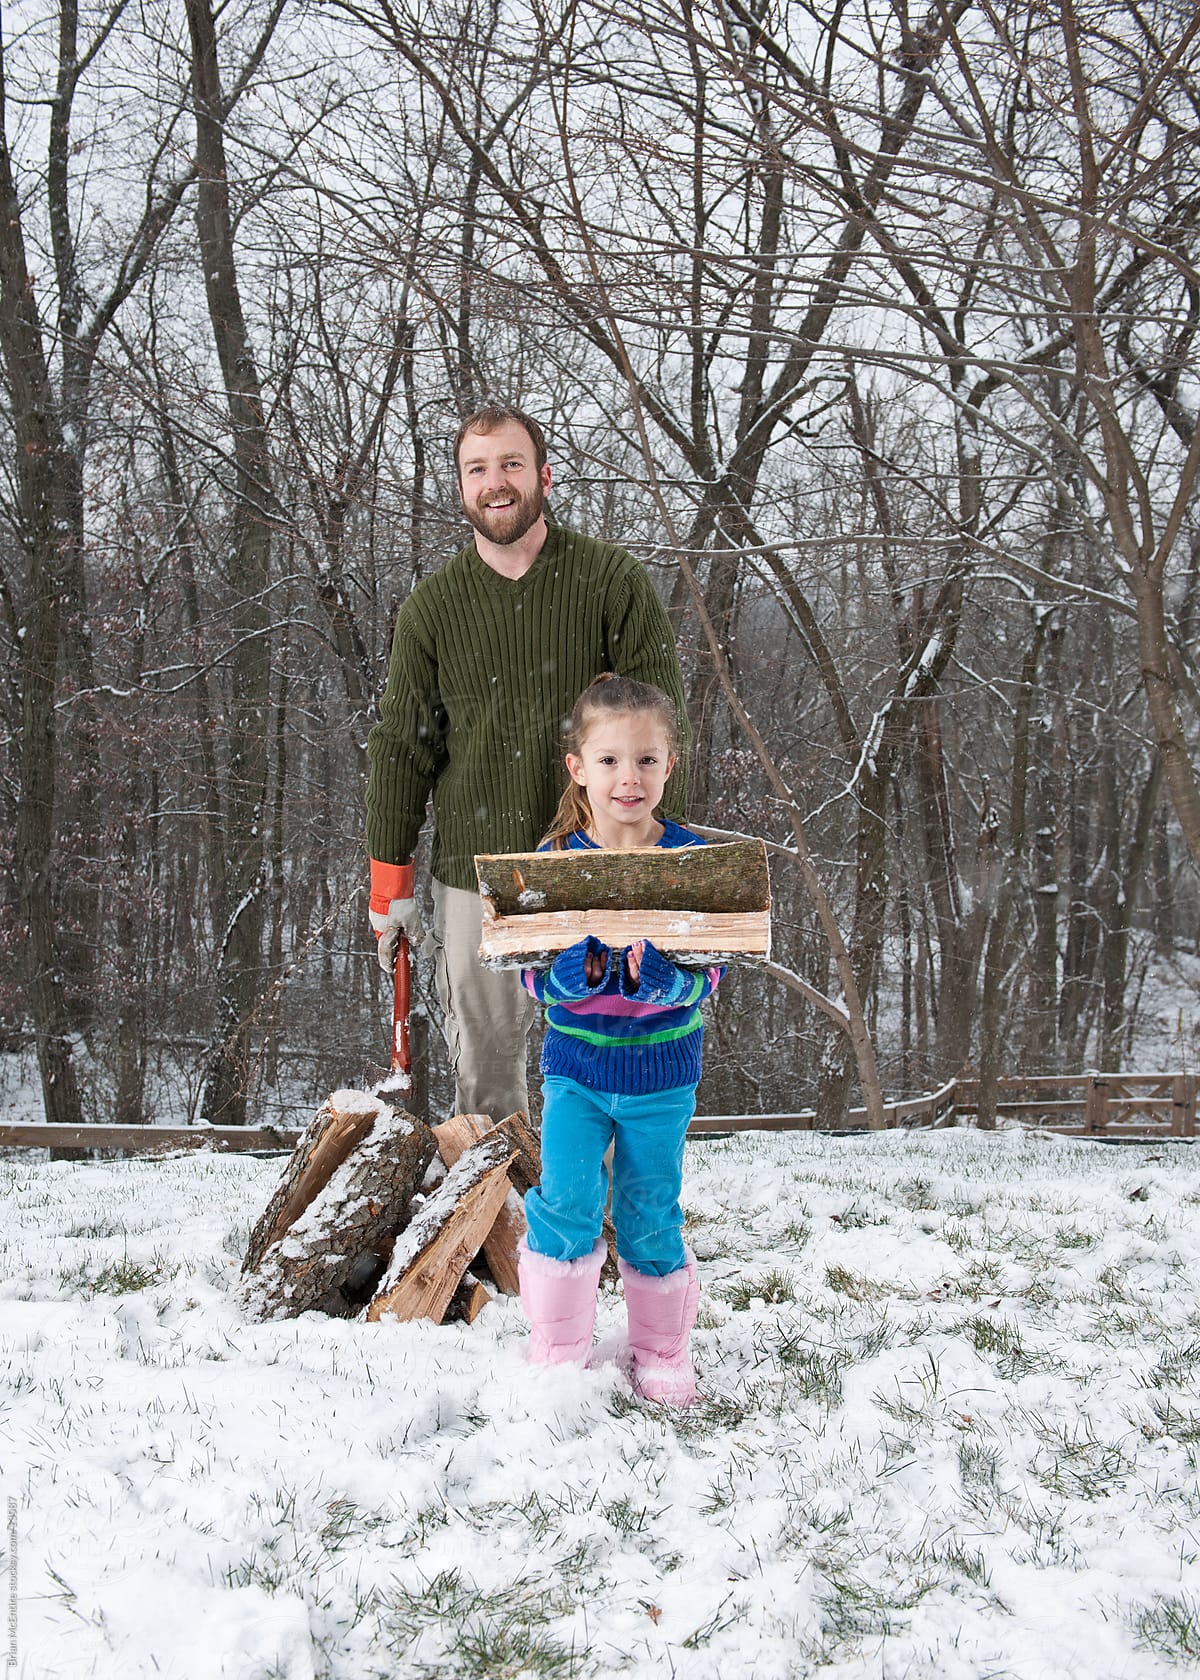 Splitting Firewood: Daughter Helps with Household Chores